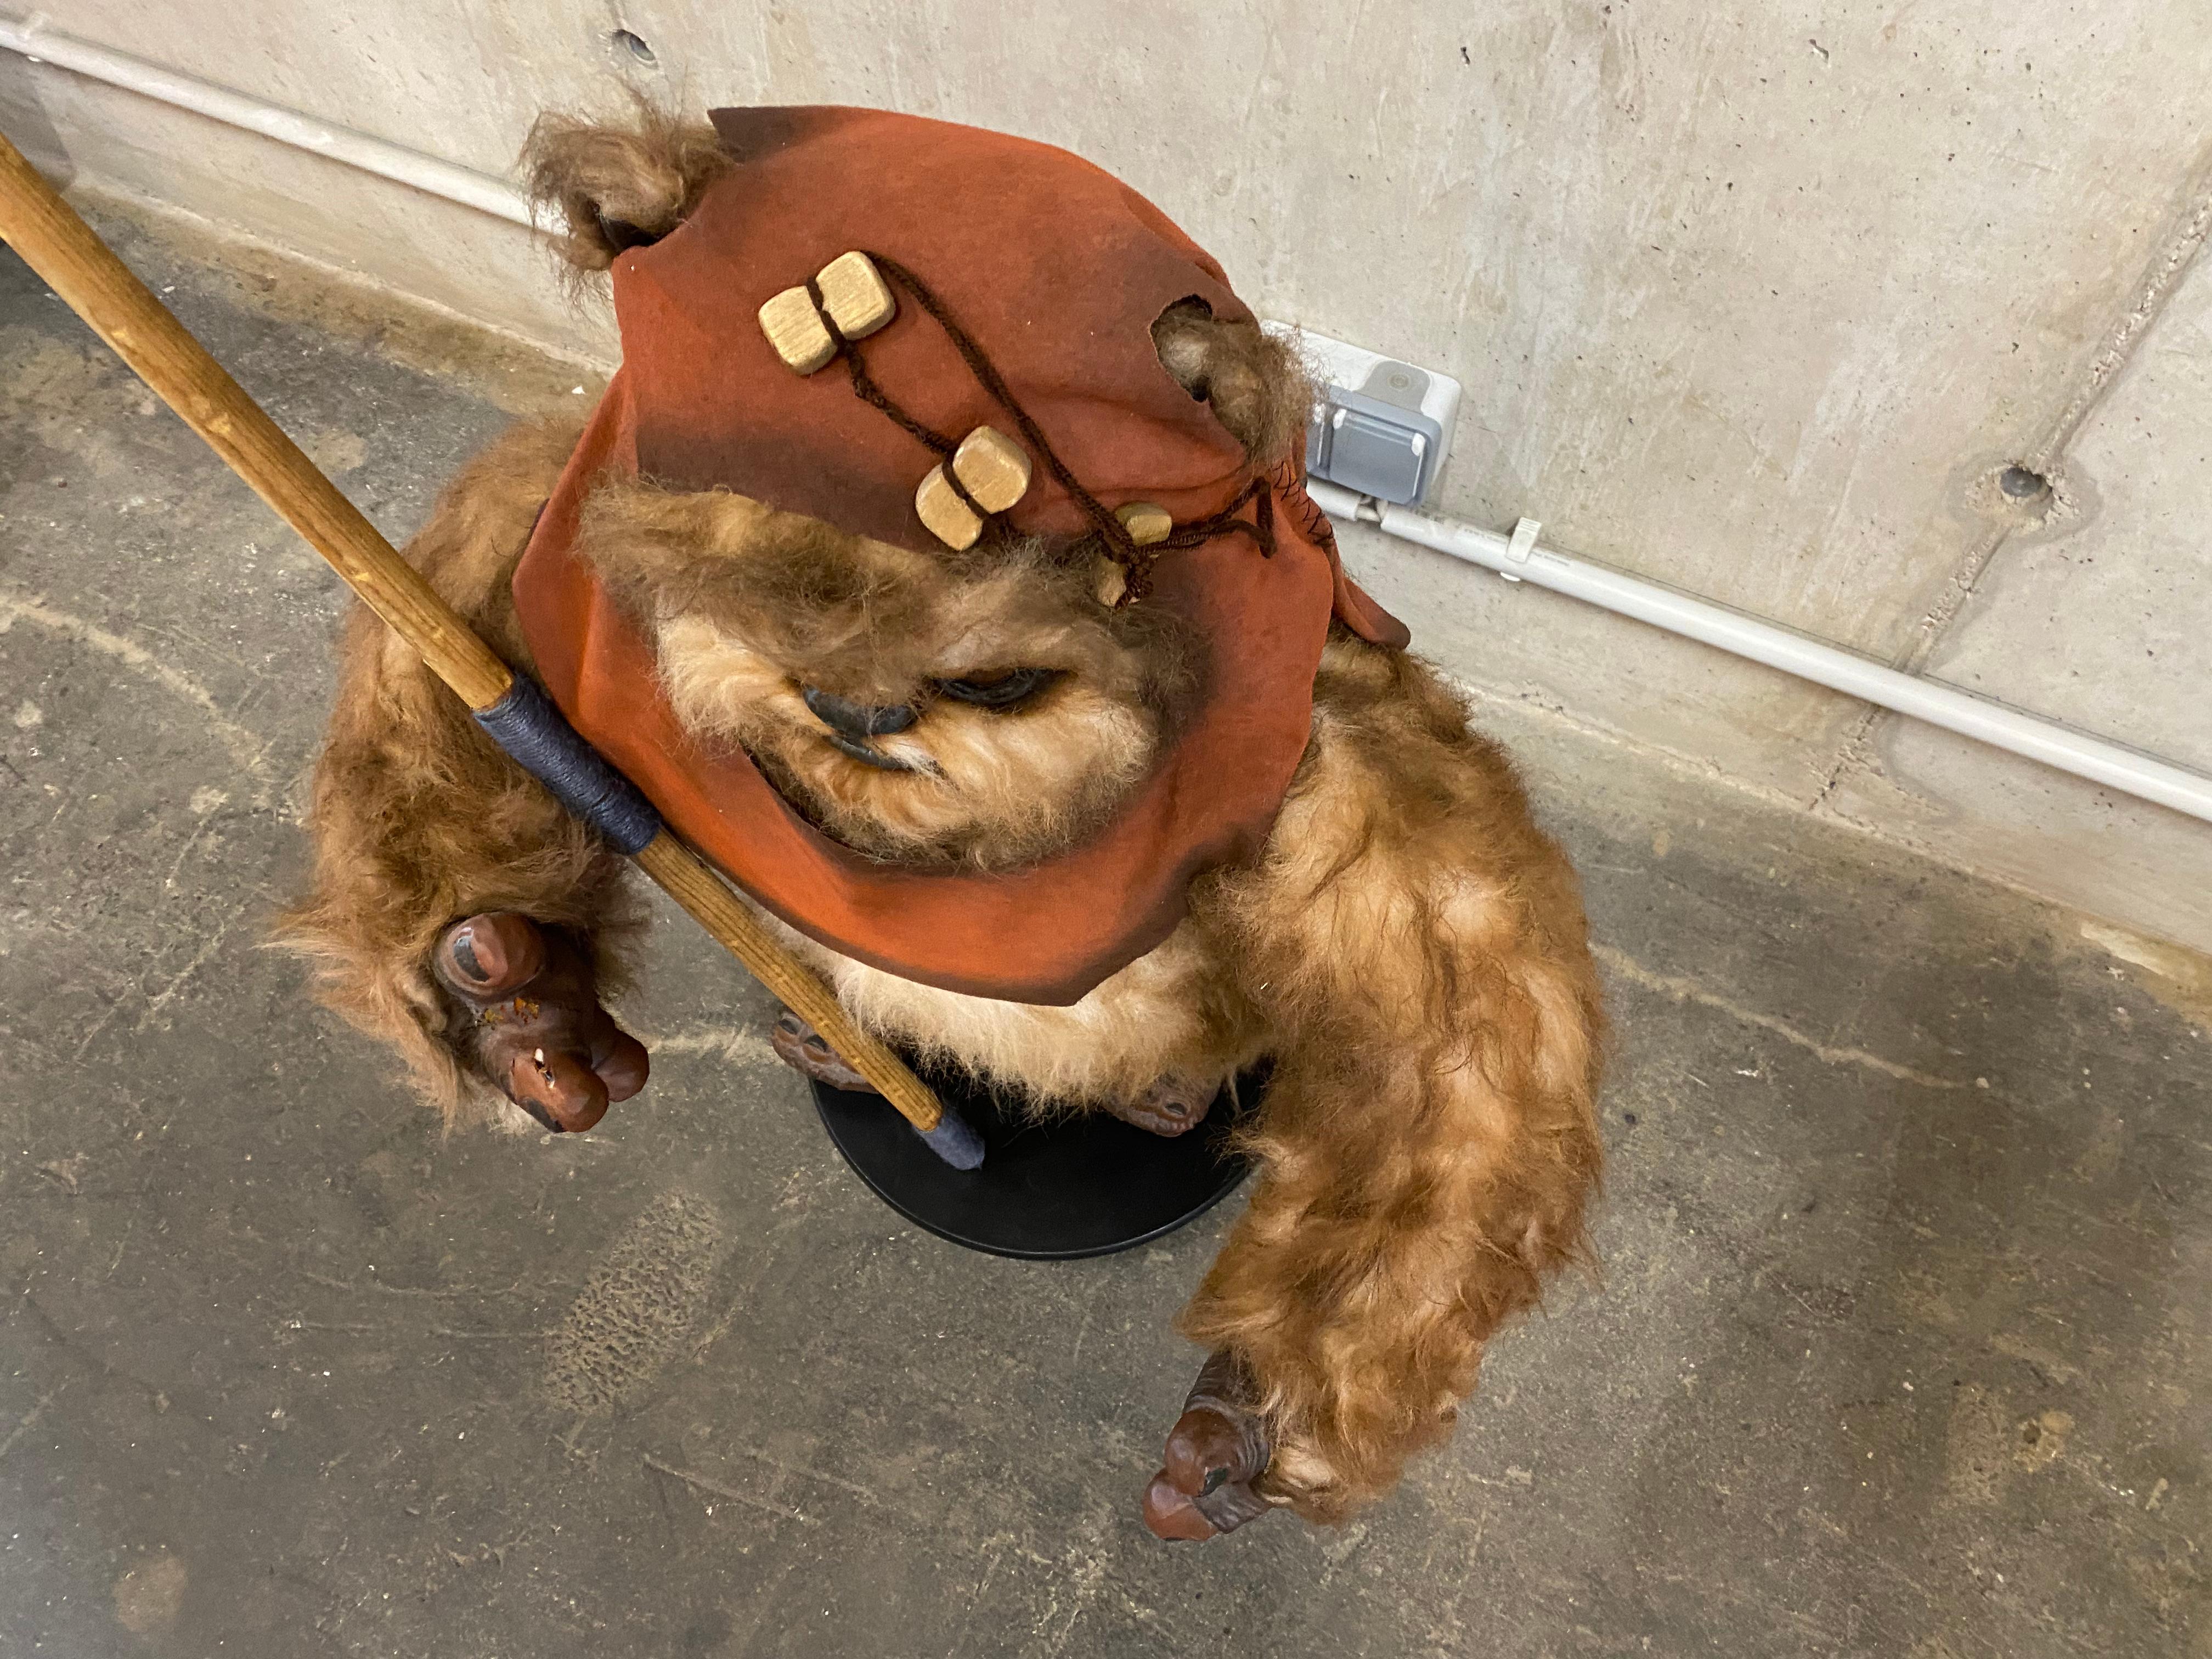 Textile Life Size Wicket Ewok Figure, Edition of 50 Pieces, Star Wars Photo Requisite